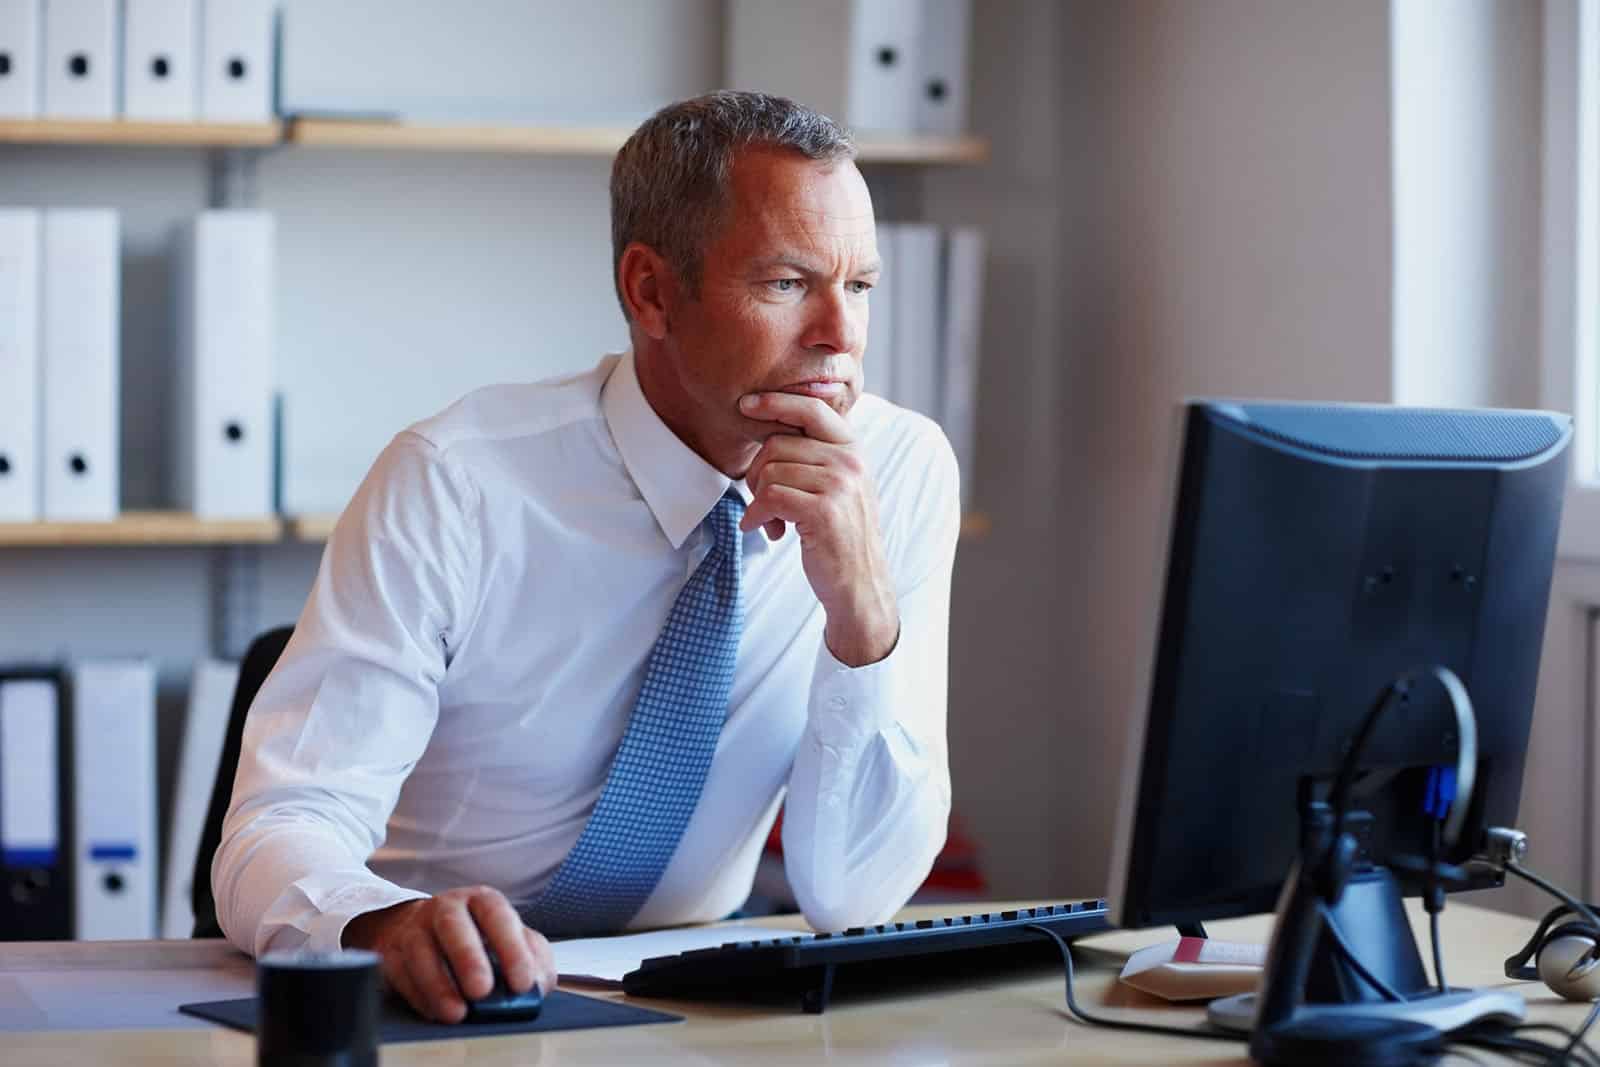 Man in a suit sitting in front of a computer.